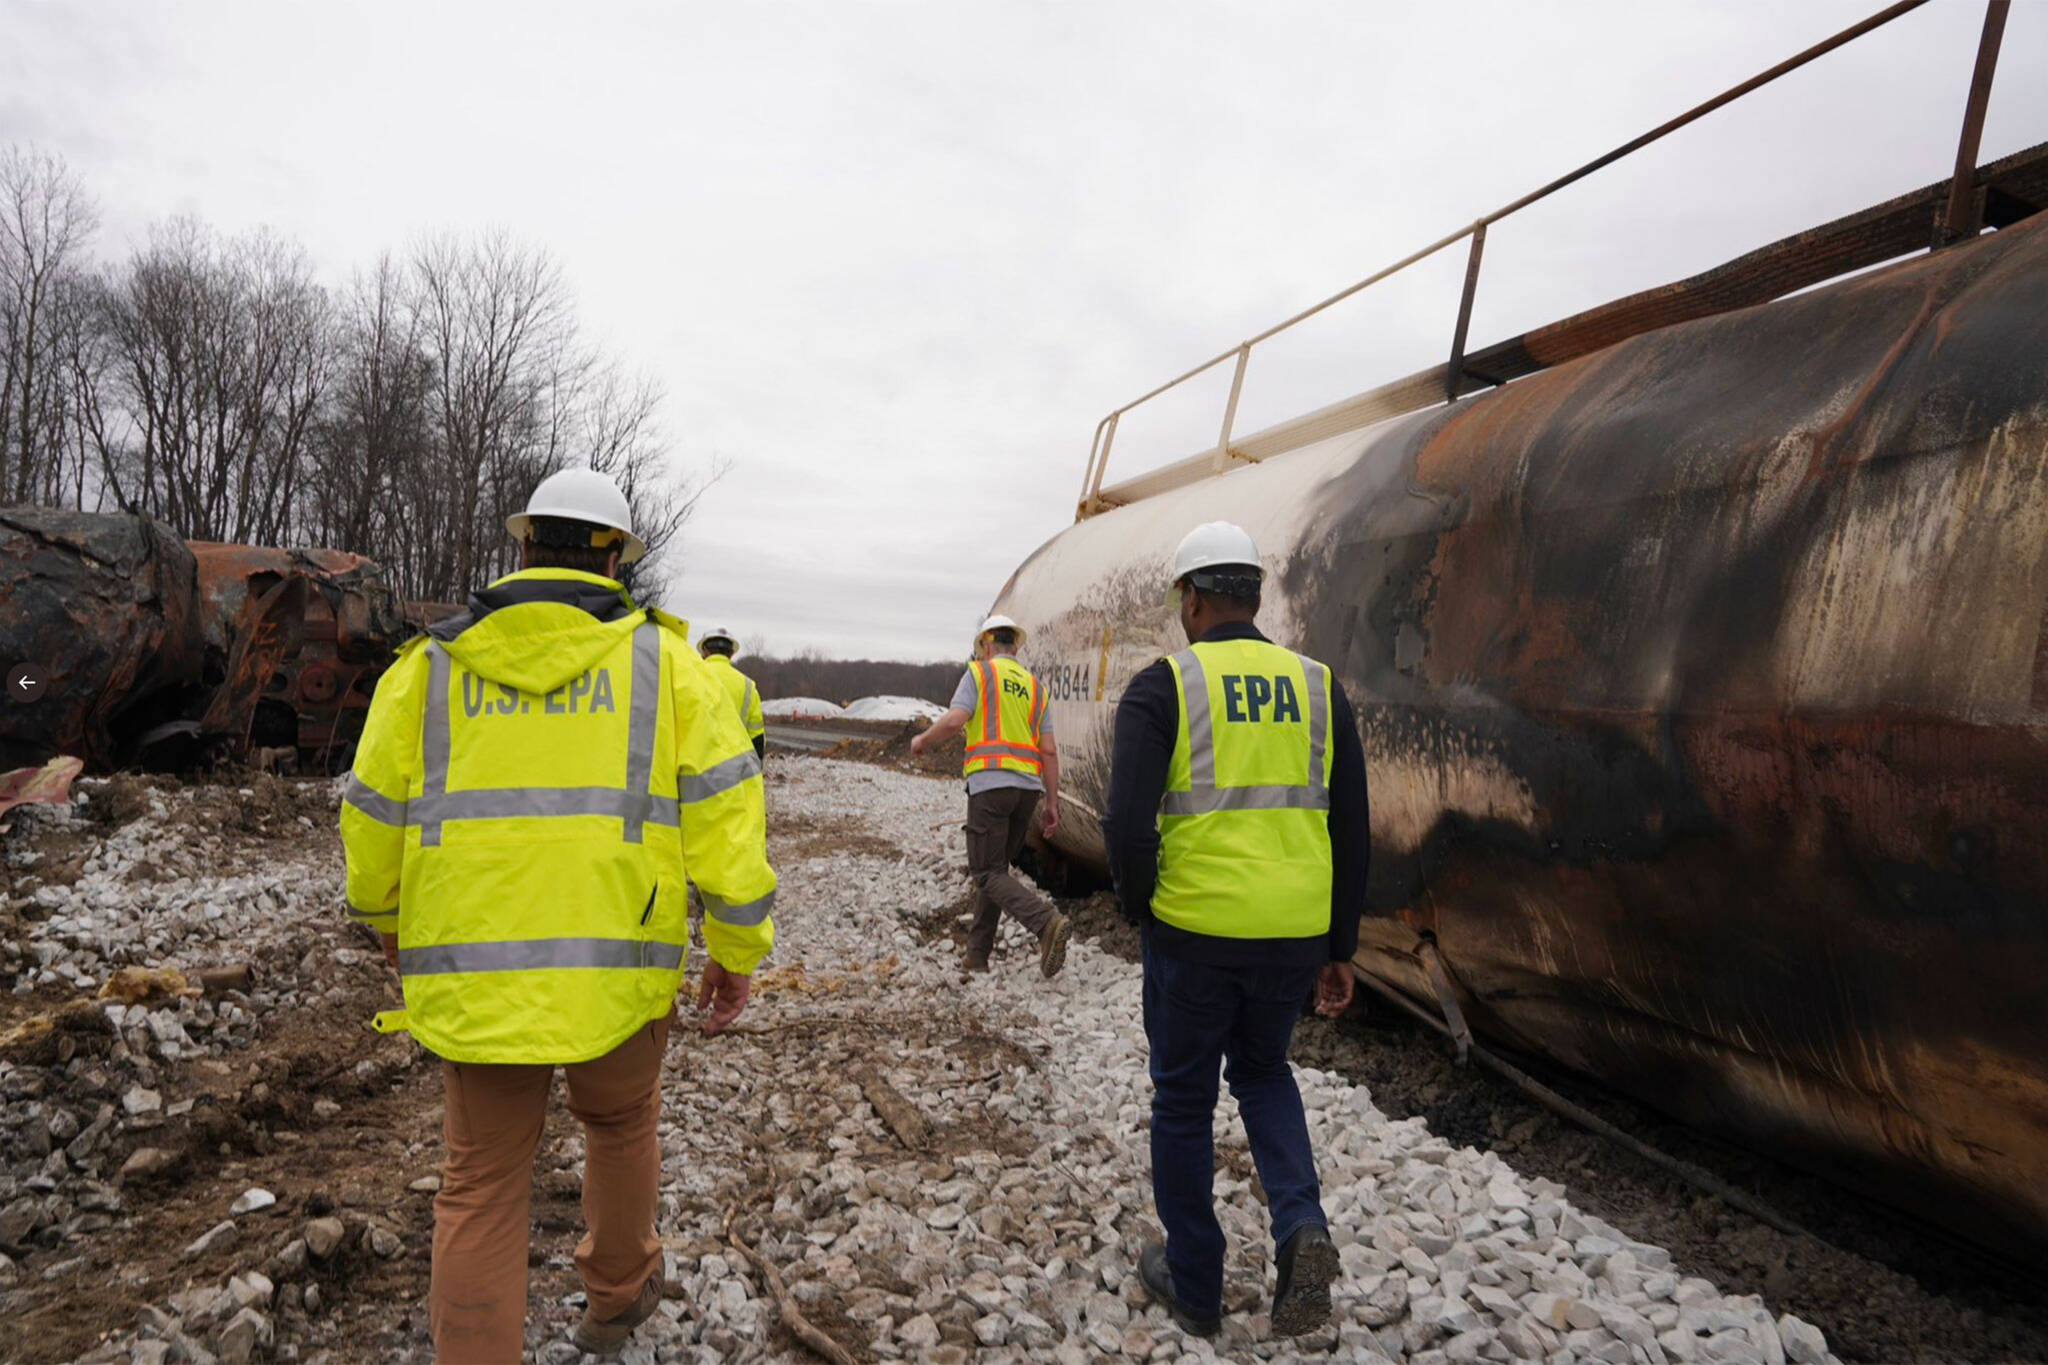 What to know about the toxic chemical spill in Ohio and its effect on